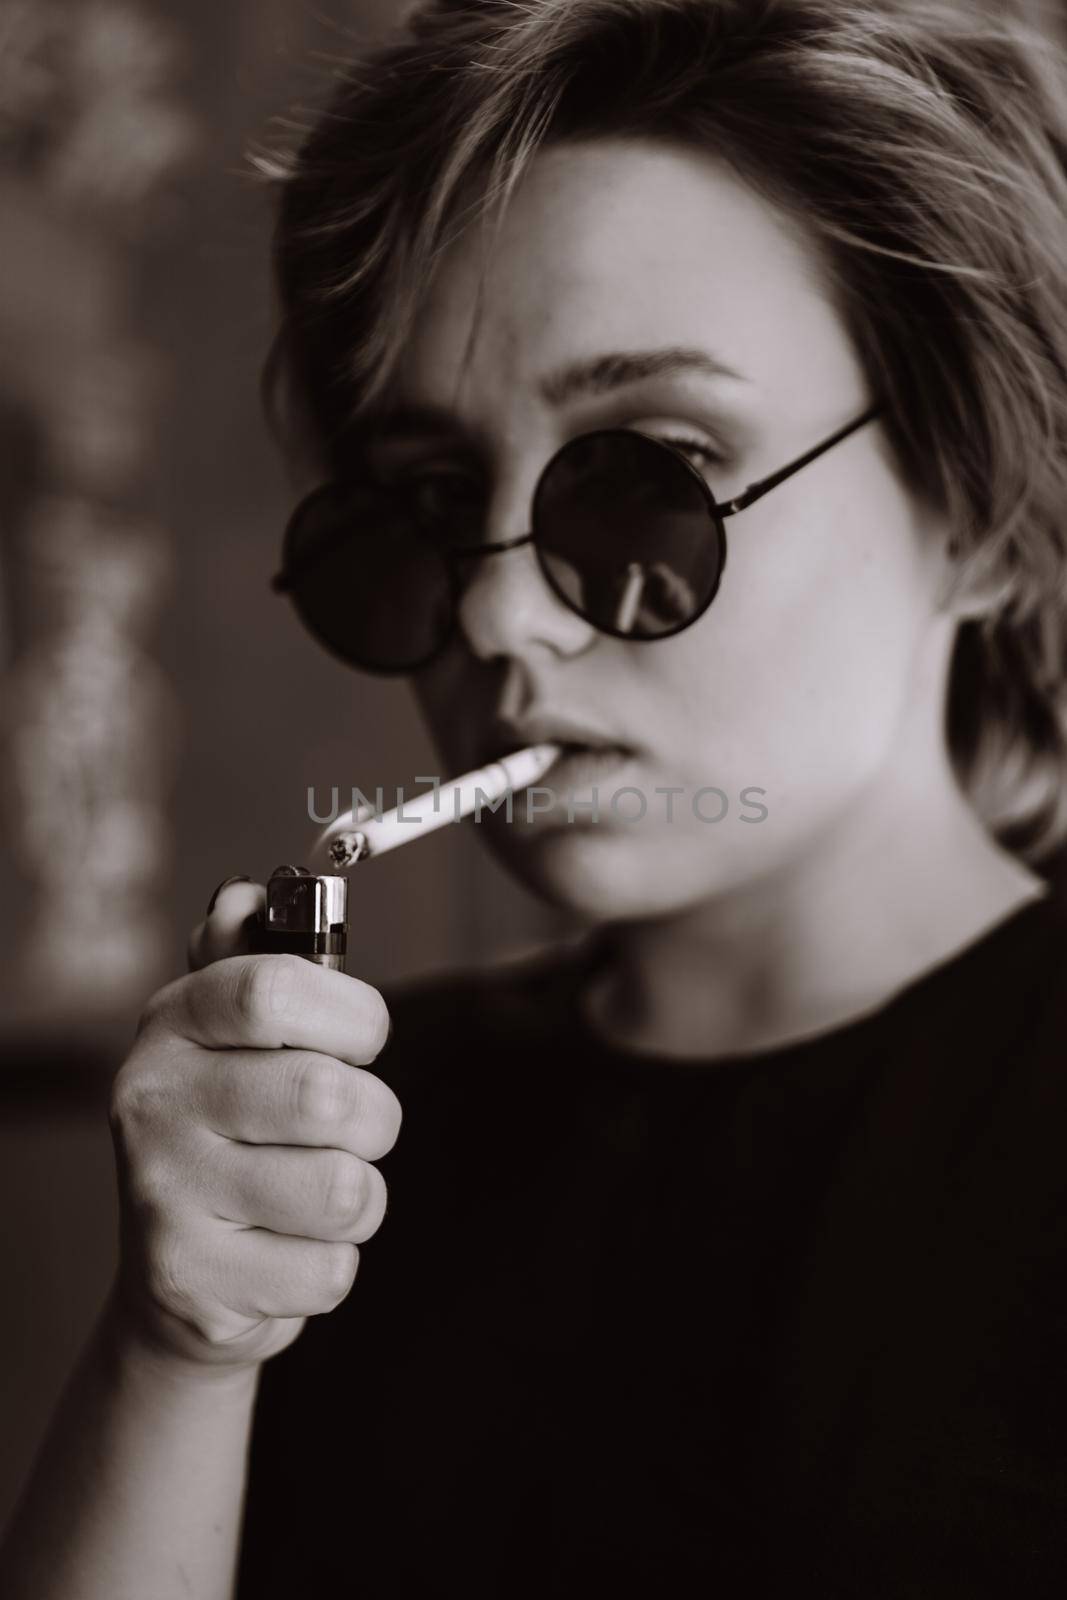 Millennial cool pretty girl with short hair and mirror sunglasses smoking cigarette in the old city. Black and white photo